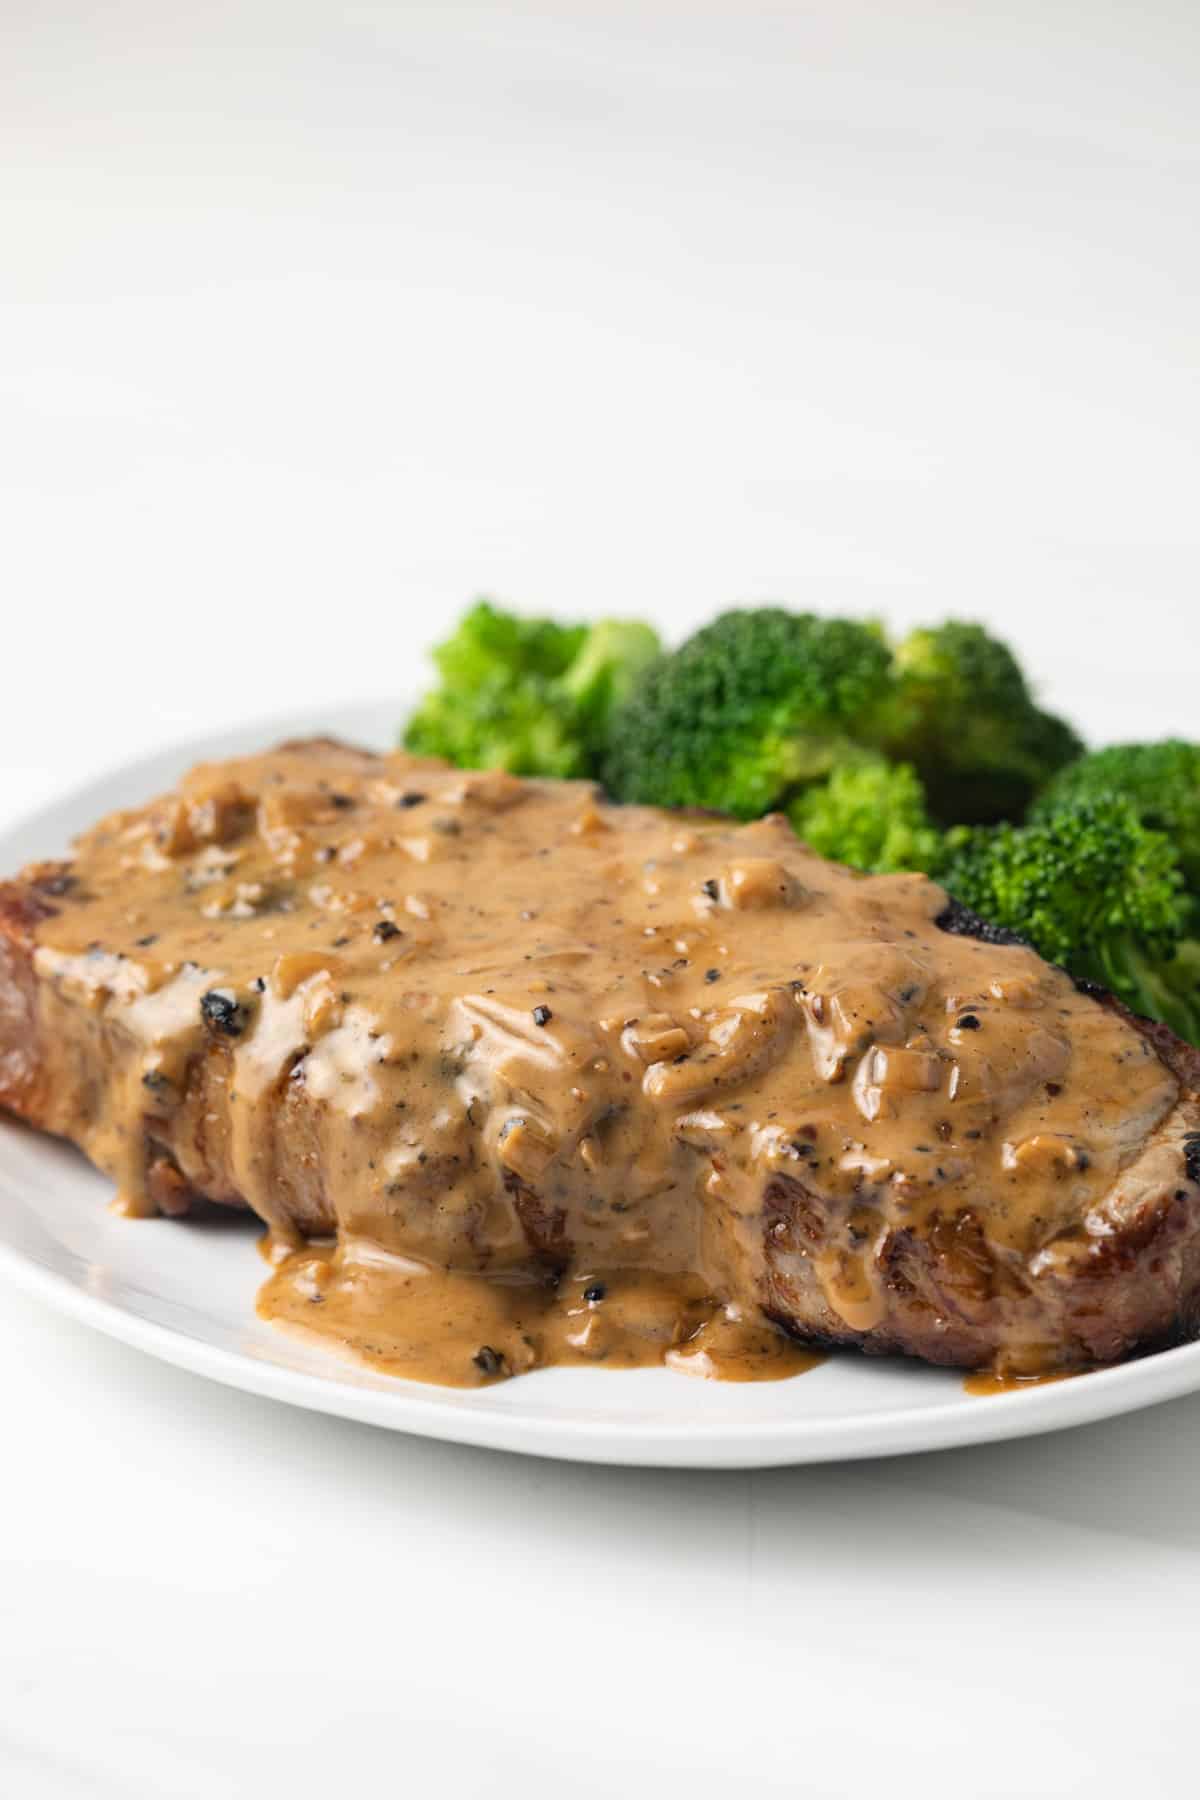 Side view of creamy peppercorn sauce over a steak.